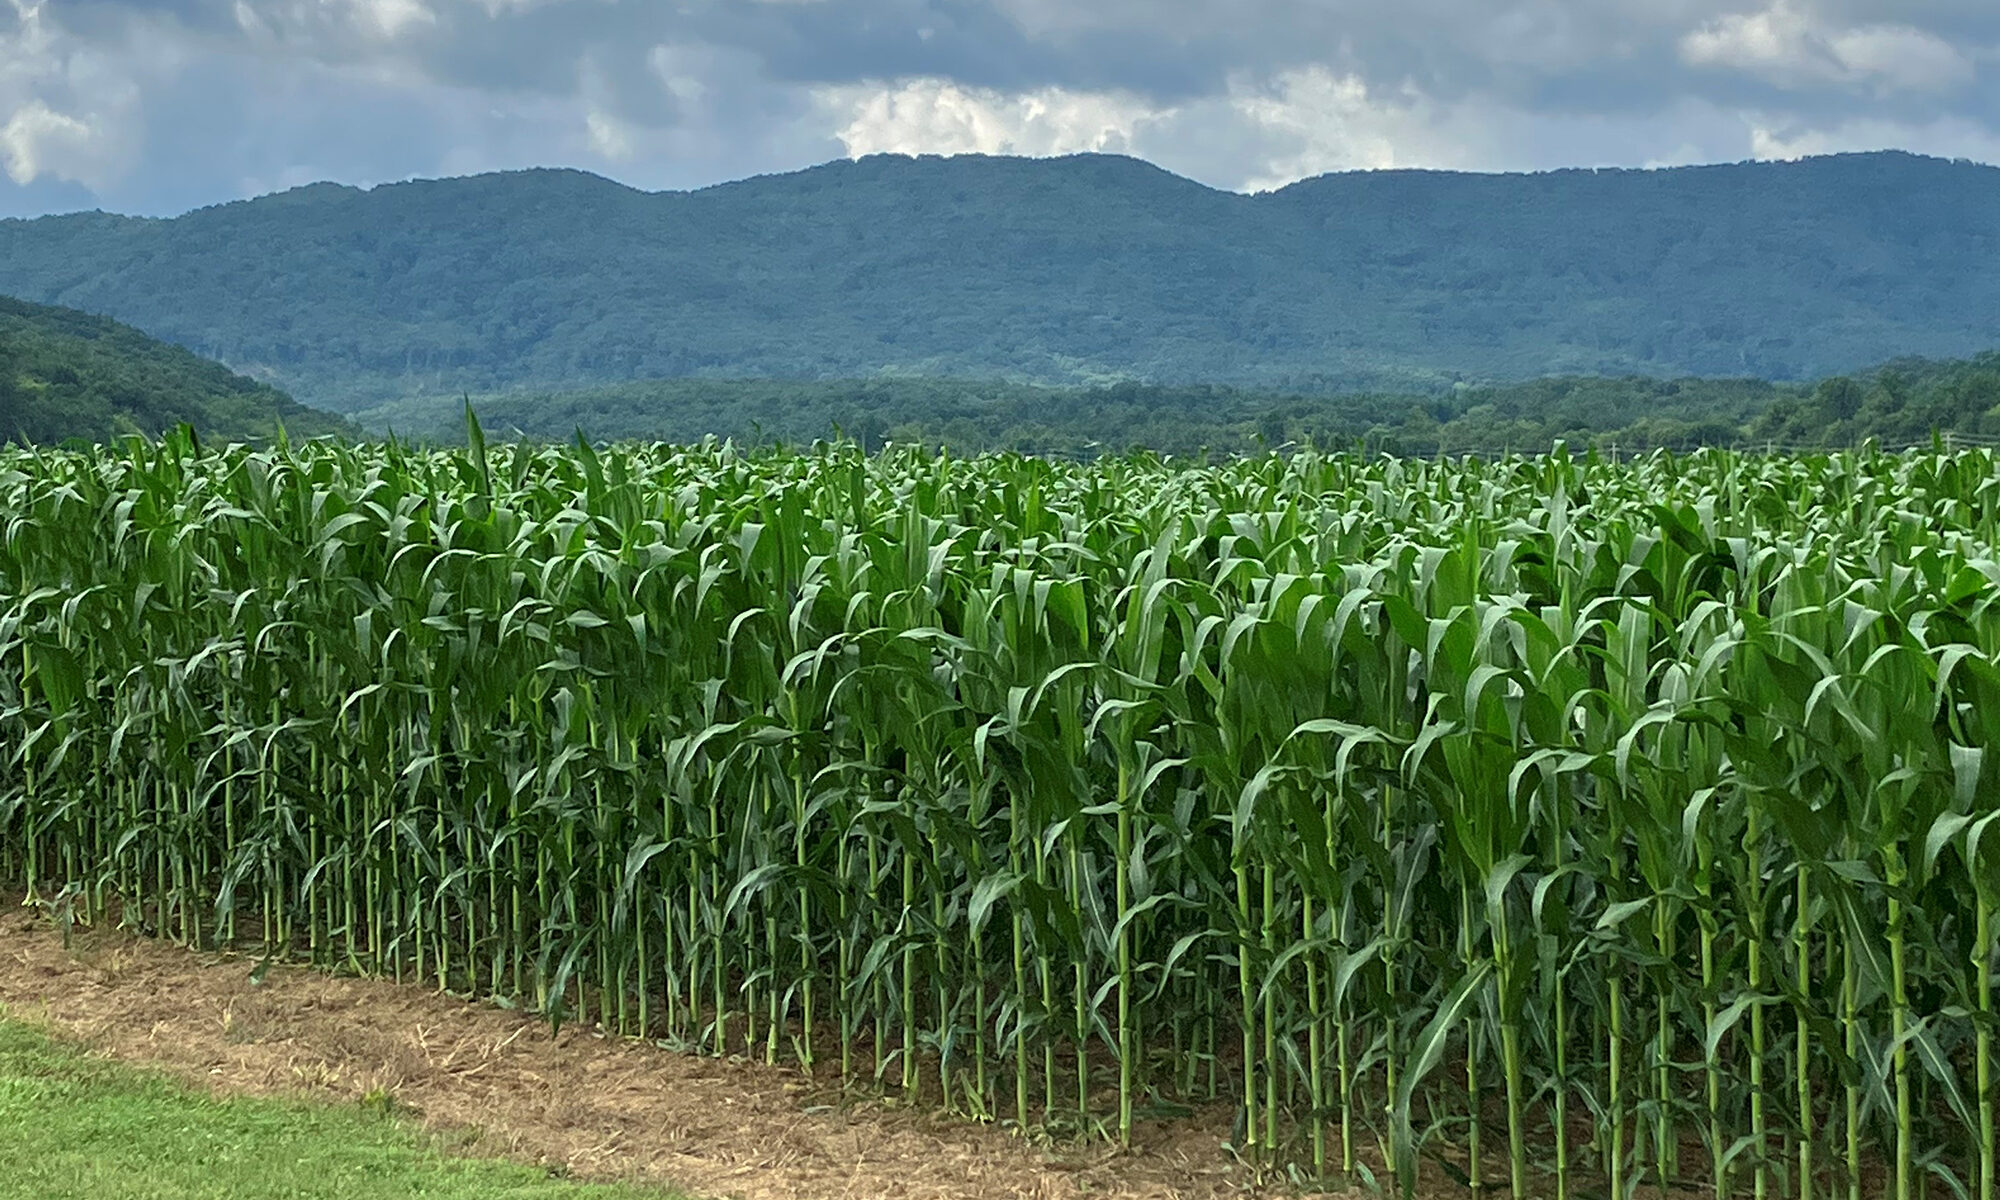 rows of corn growing with mountains in the background